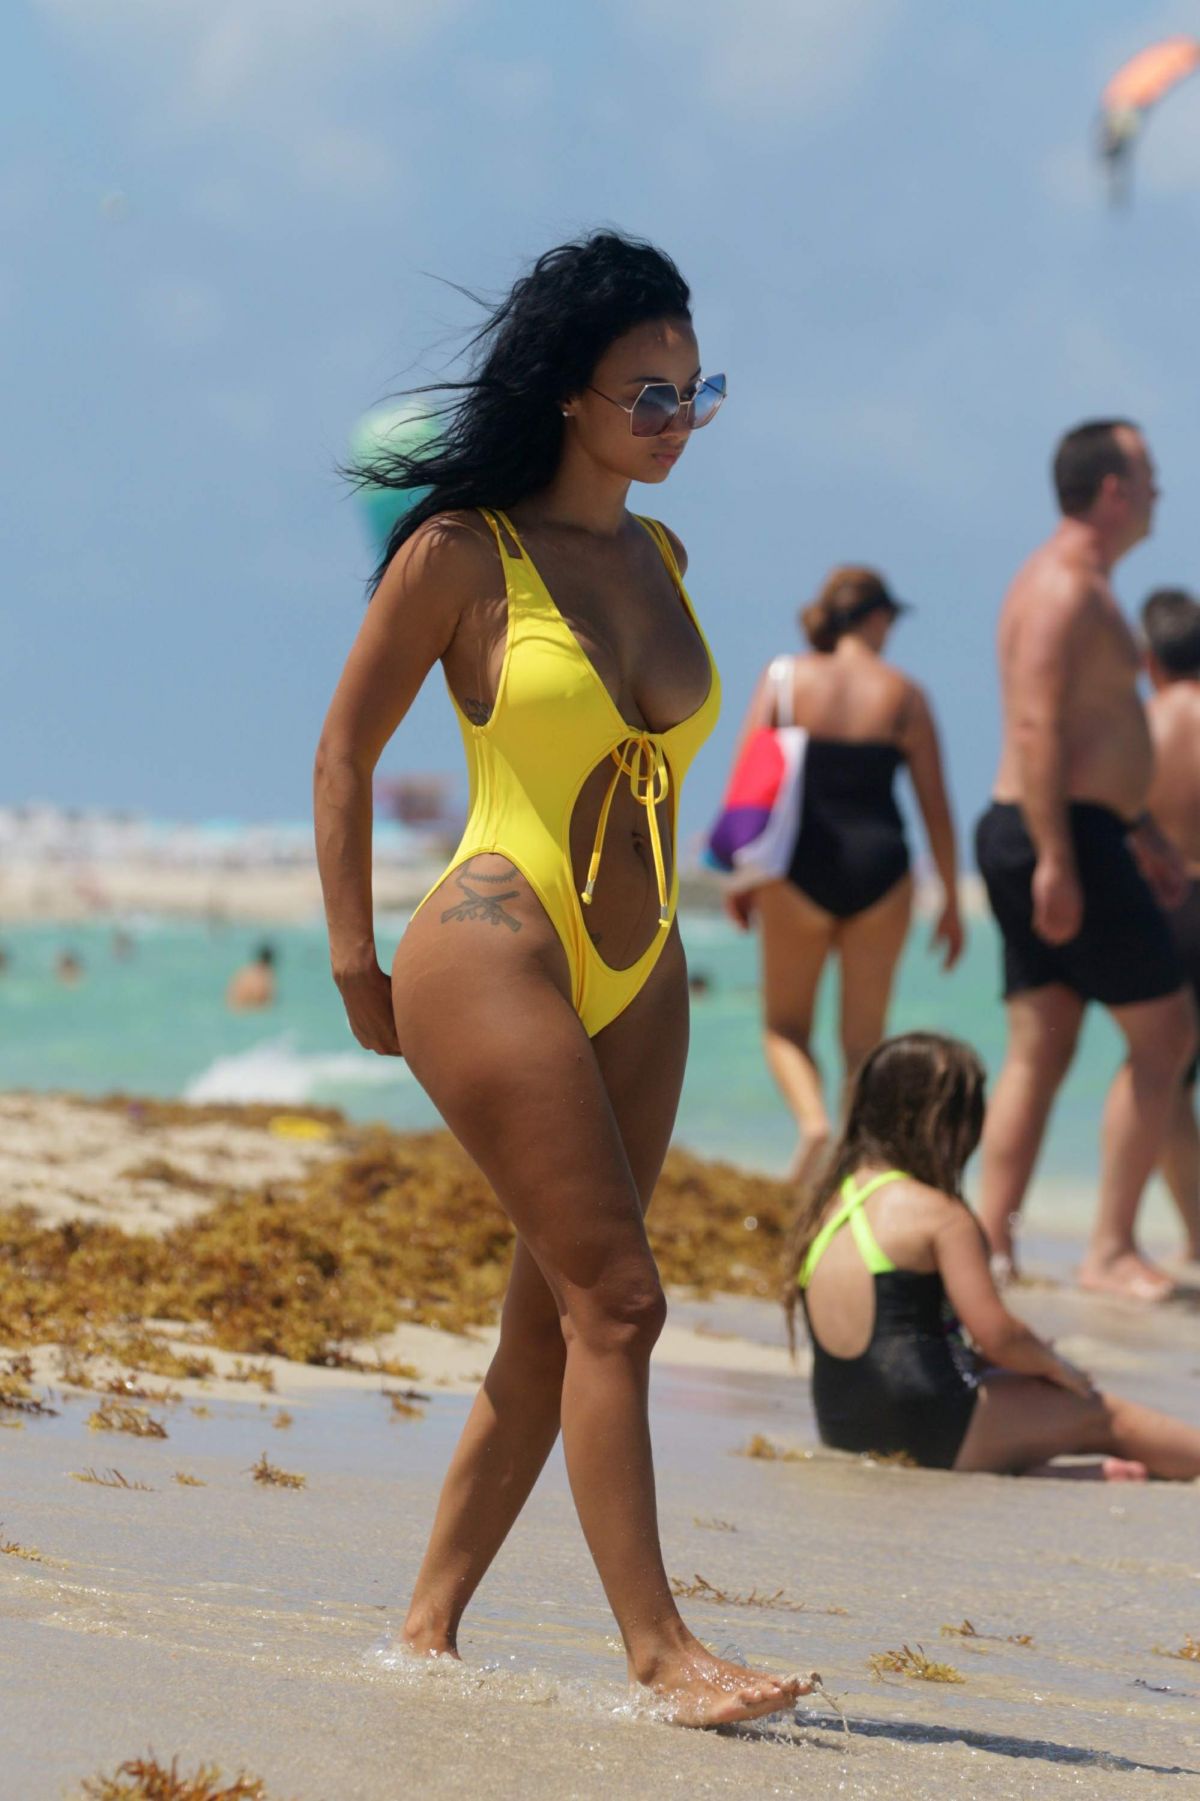 DRAYA MICHELE in Swimsuit at a Beach in Miami 07/17/2016.